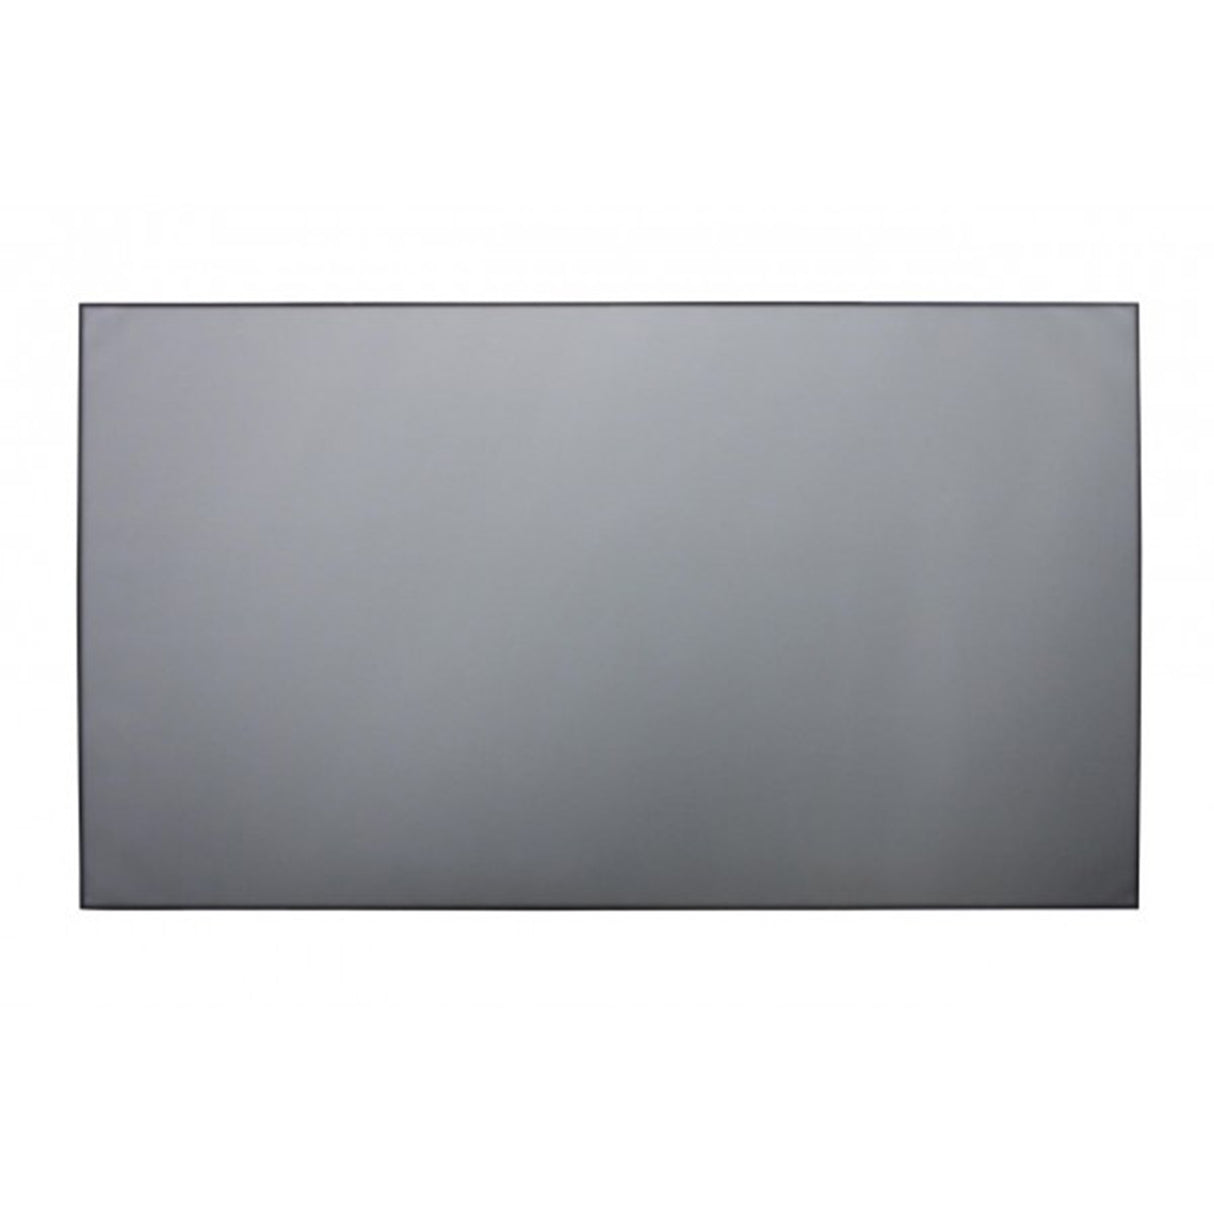 Prime Edgeless Grey Fabric Ambient Light Rejection (ALR) Flat Fixed Frame Projection Screen 150" (For Long Throw Projectors)